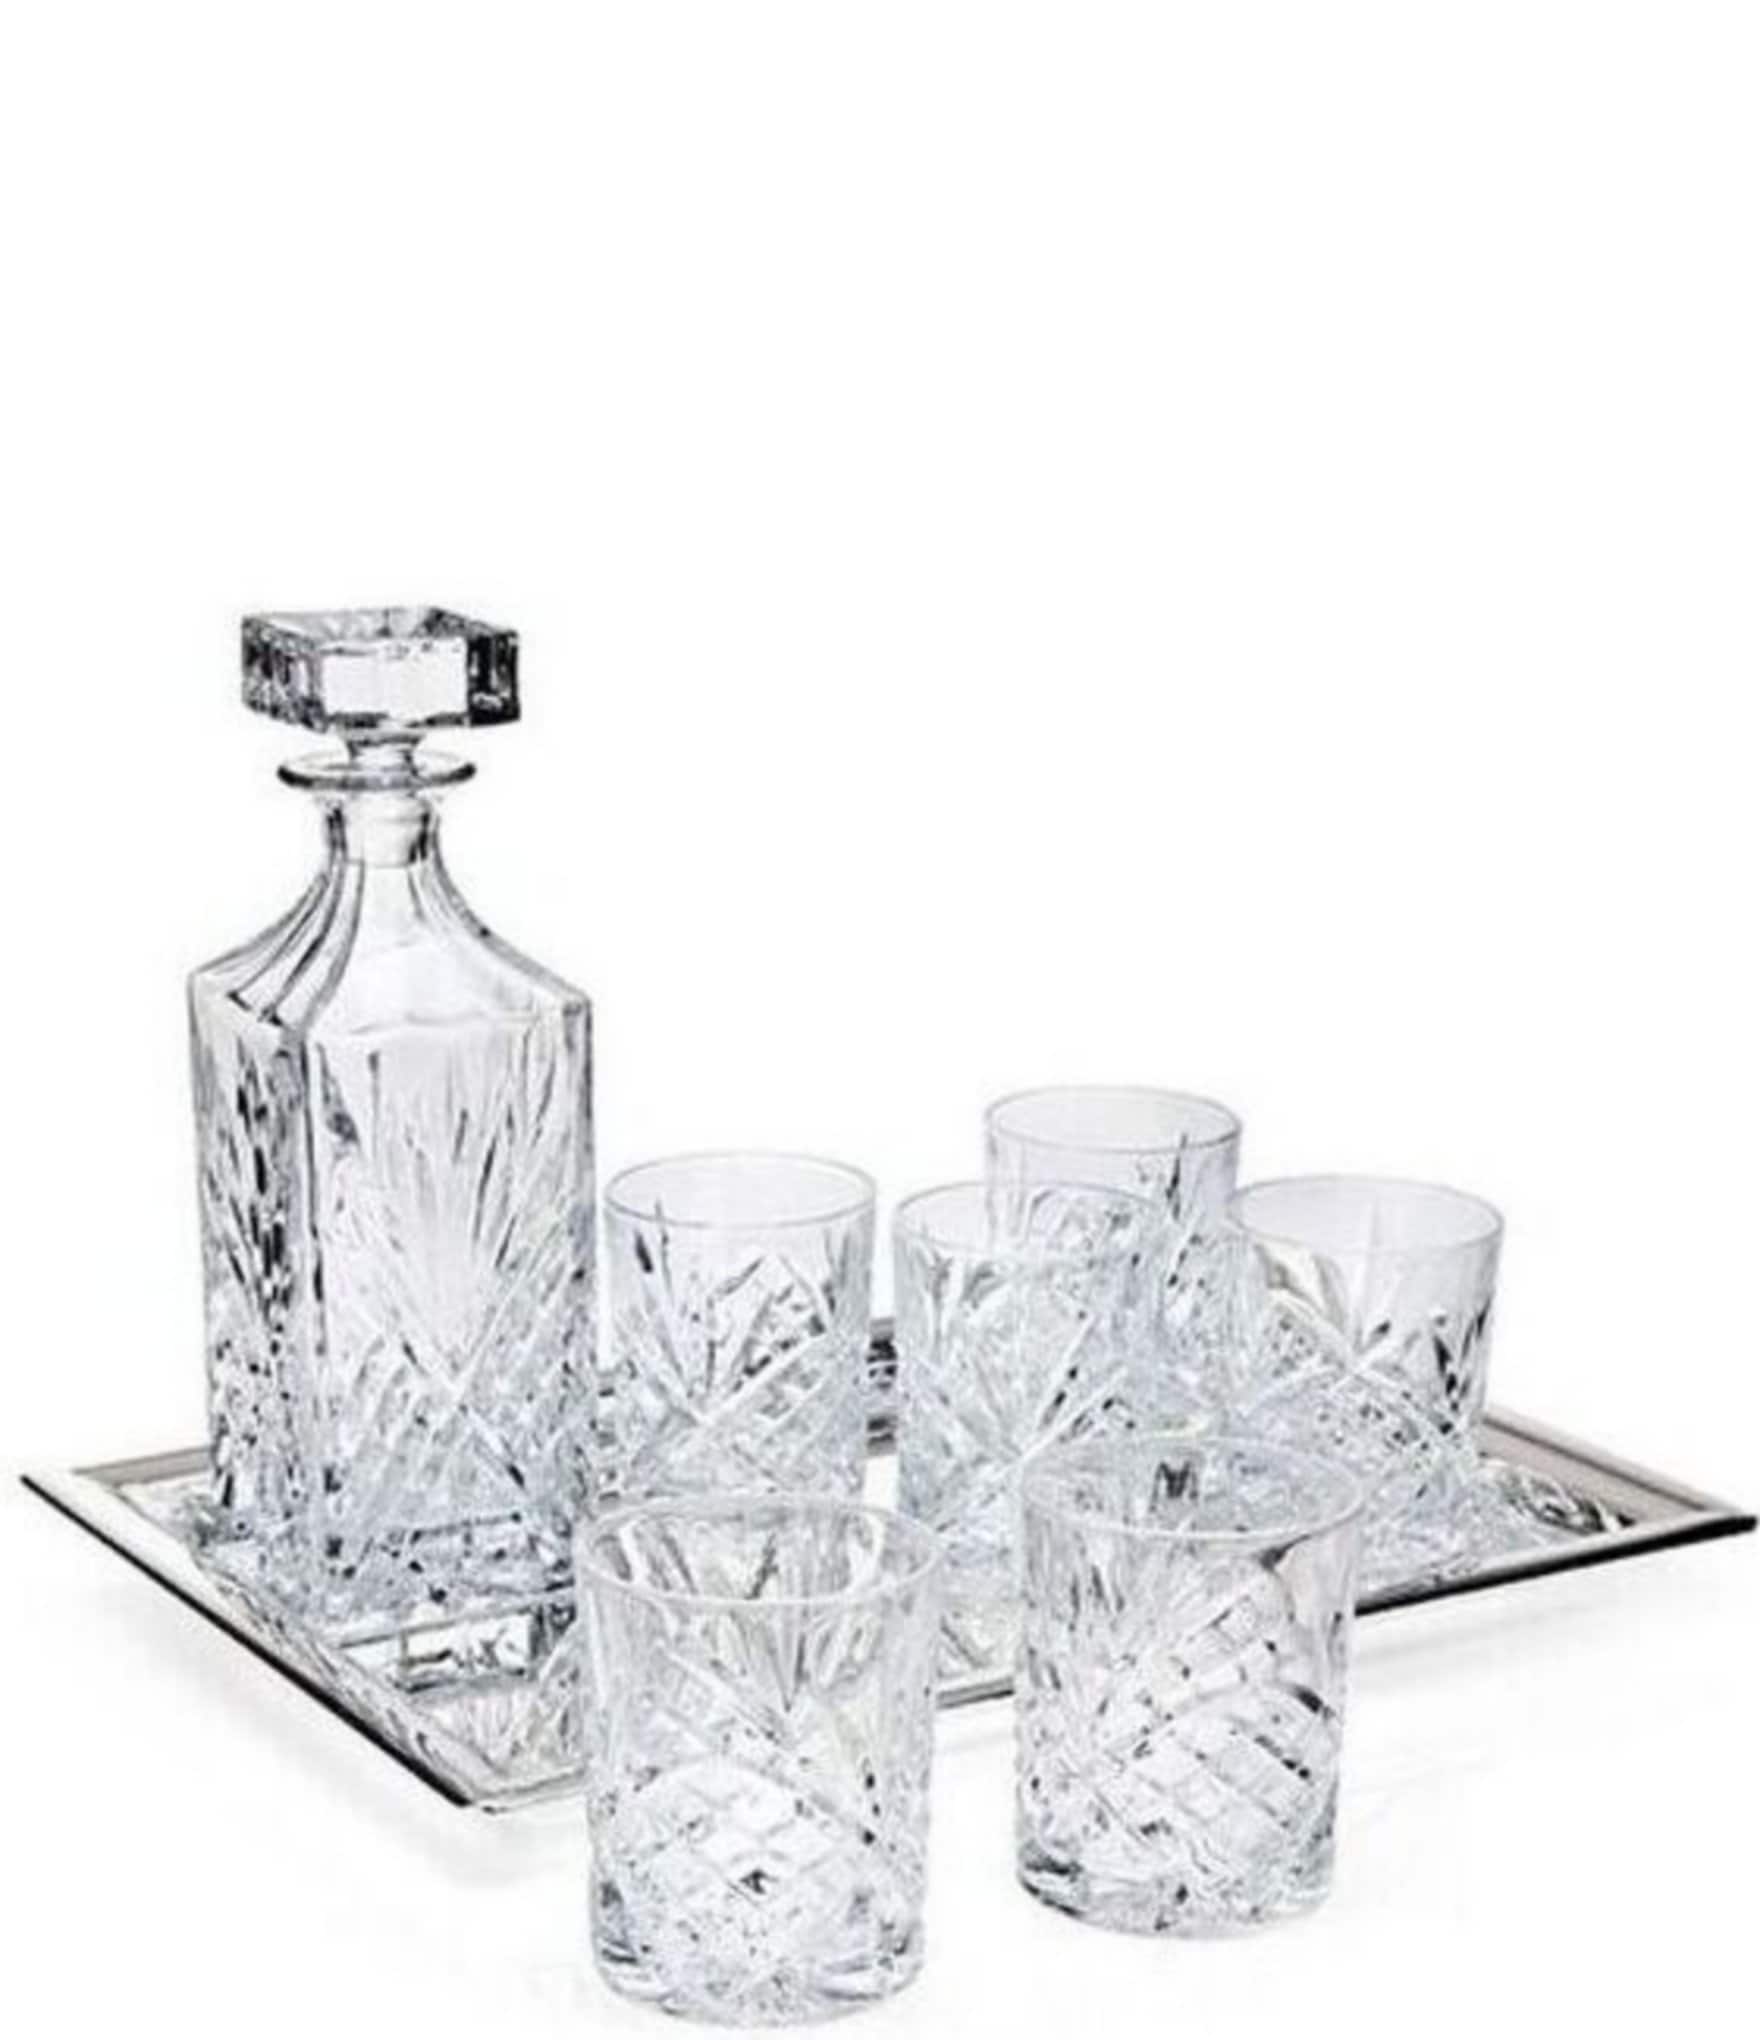 Dublin Crystal Bedside Night Carafe Tumbler Glass Lid Decanter Whiskey 